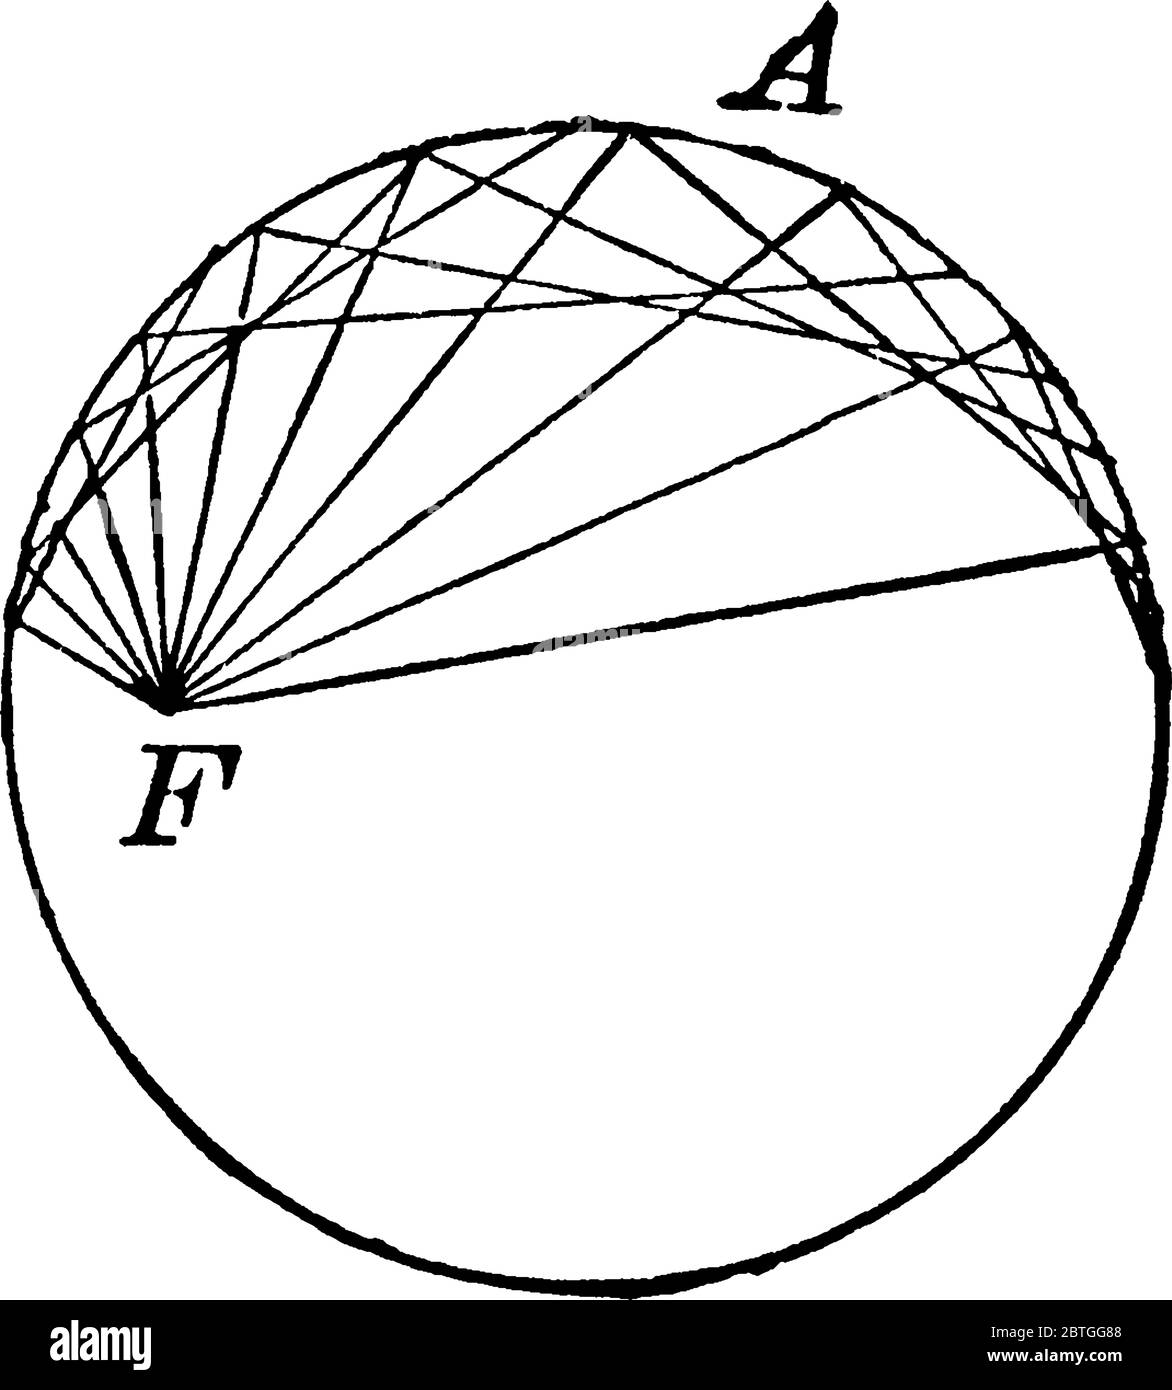 The Auxiliary Circle of a Cone is defined as the circle with its center on the ellipse's axis, which contains the two vertices., vintage line drawing Stock Vector